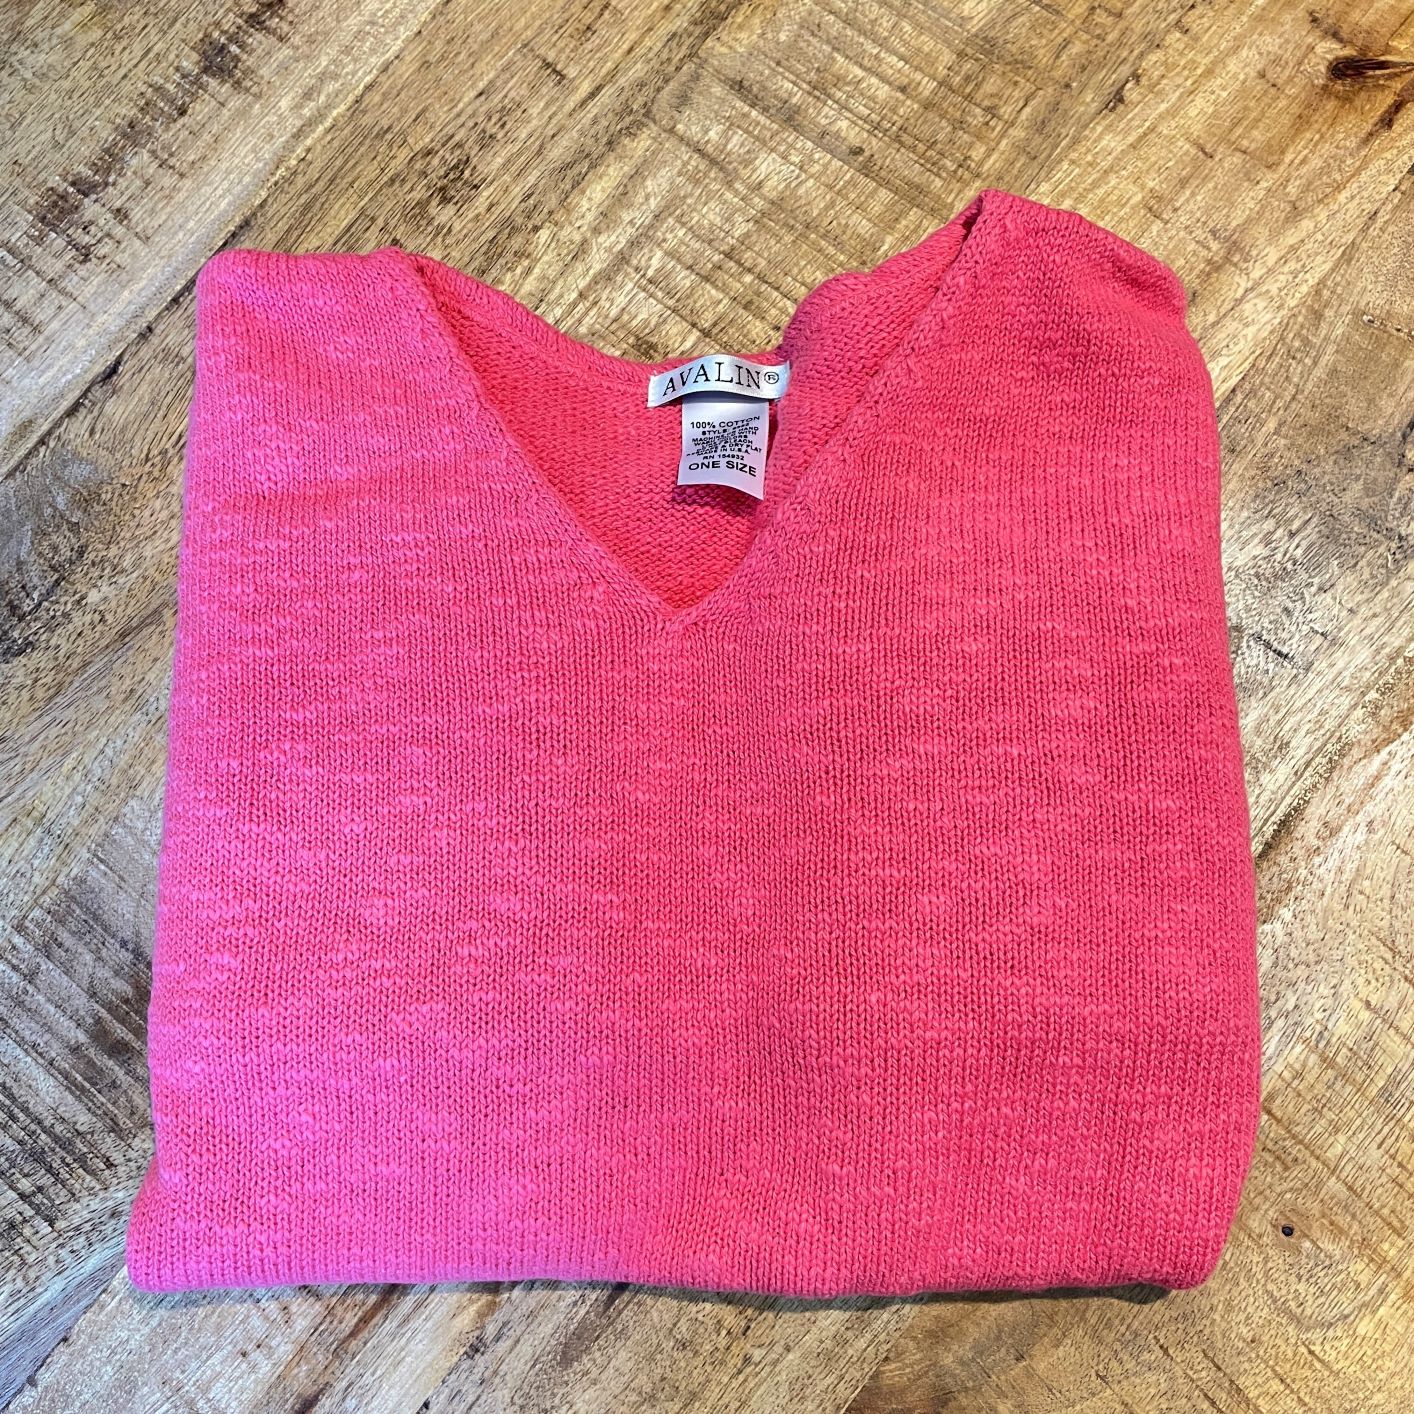 100% cotton slub sweater by Avalin. In color Coral with long sleeves, v-neck,  straight hem with ribbed edges. Semi-crop style falls just below the belt. Made in USA.